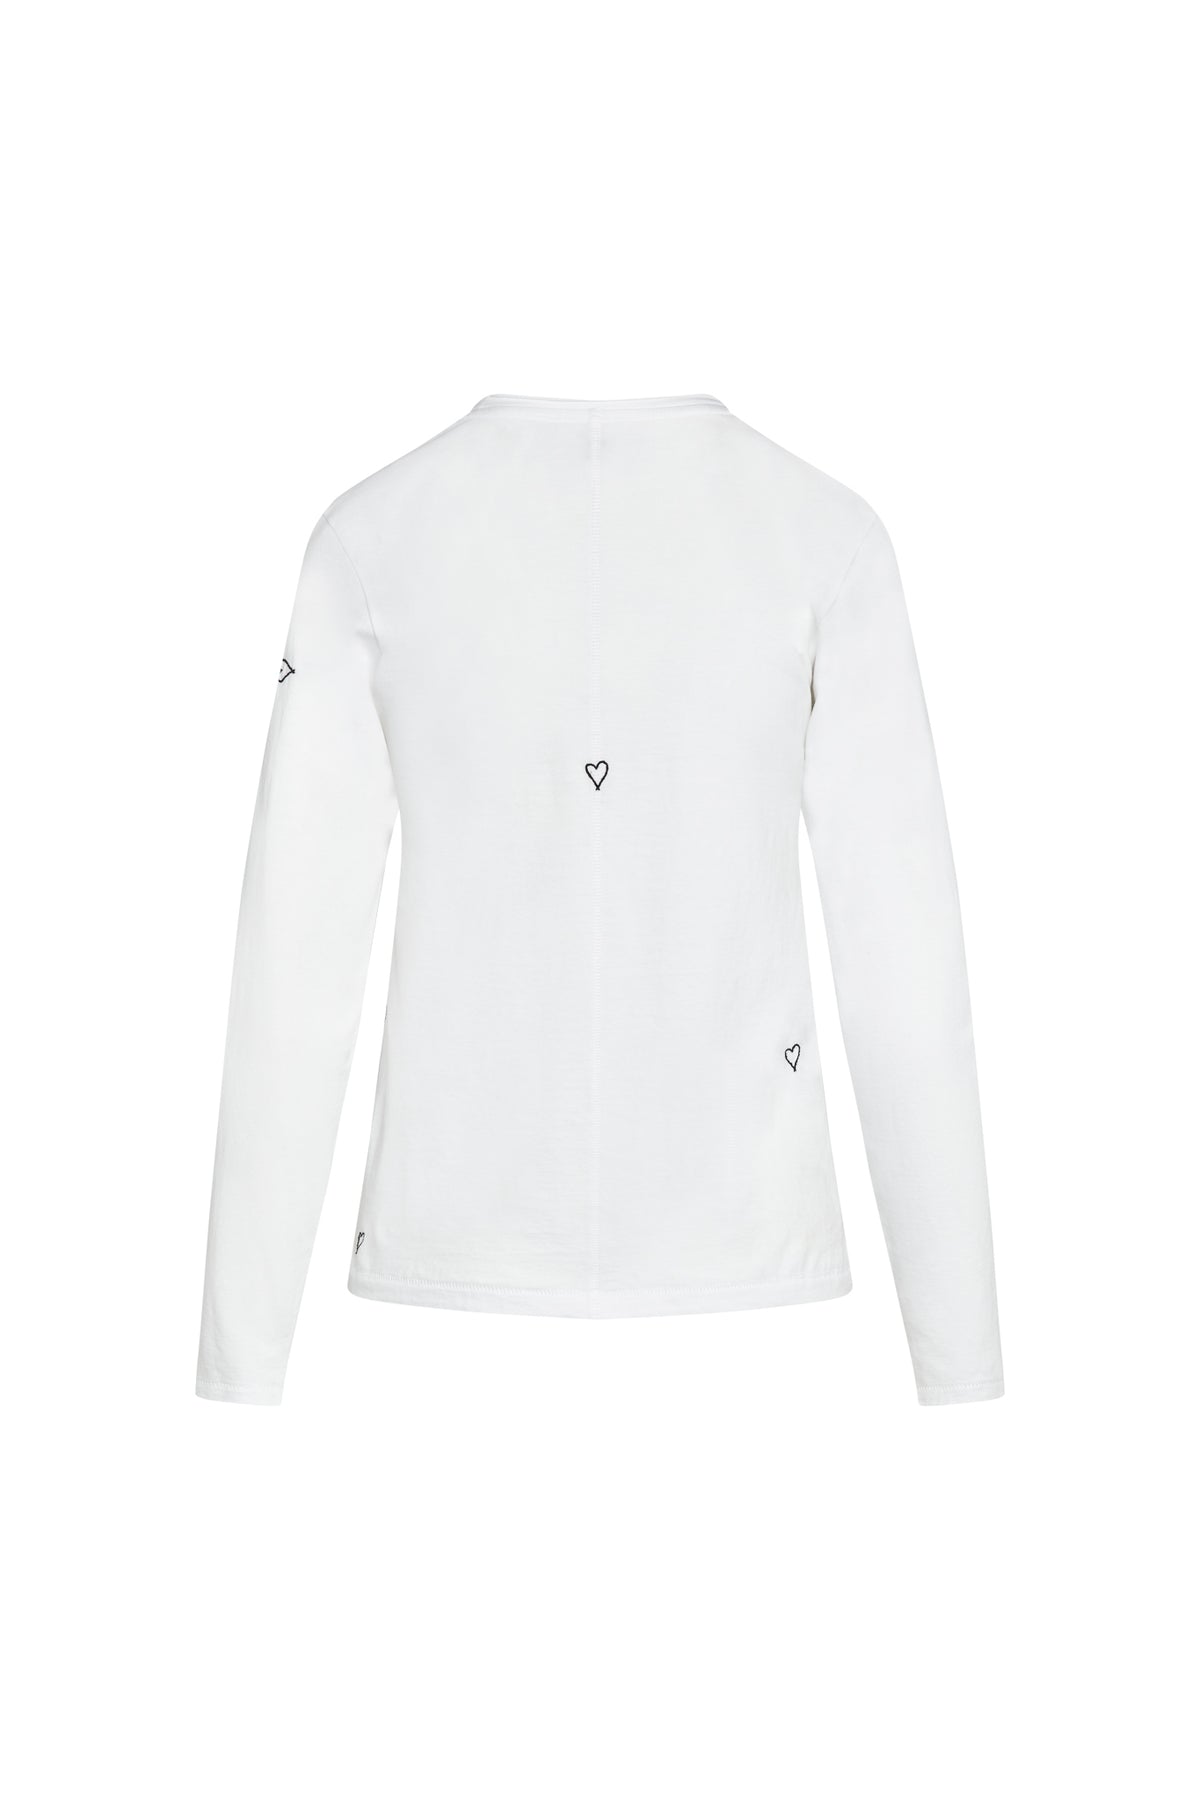 Catherine Gee Embroidered L/S Tee - Heart